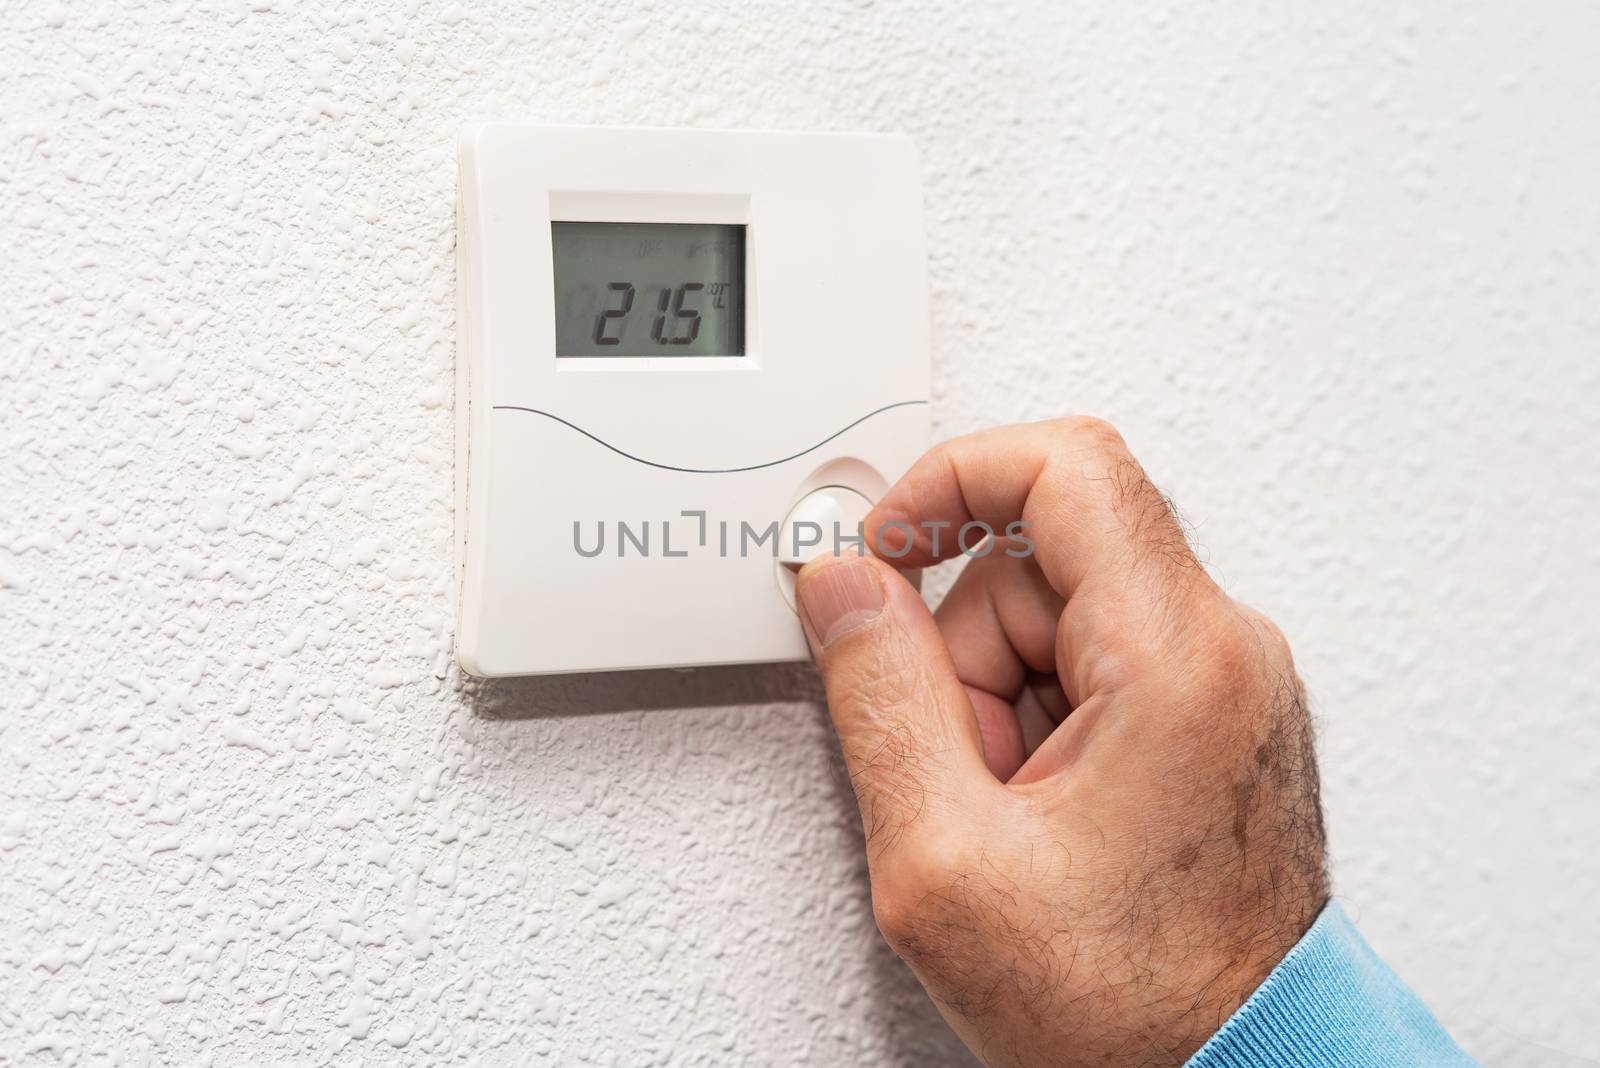 Man hand adjusting thermostat at home. Celsius temperature scale.